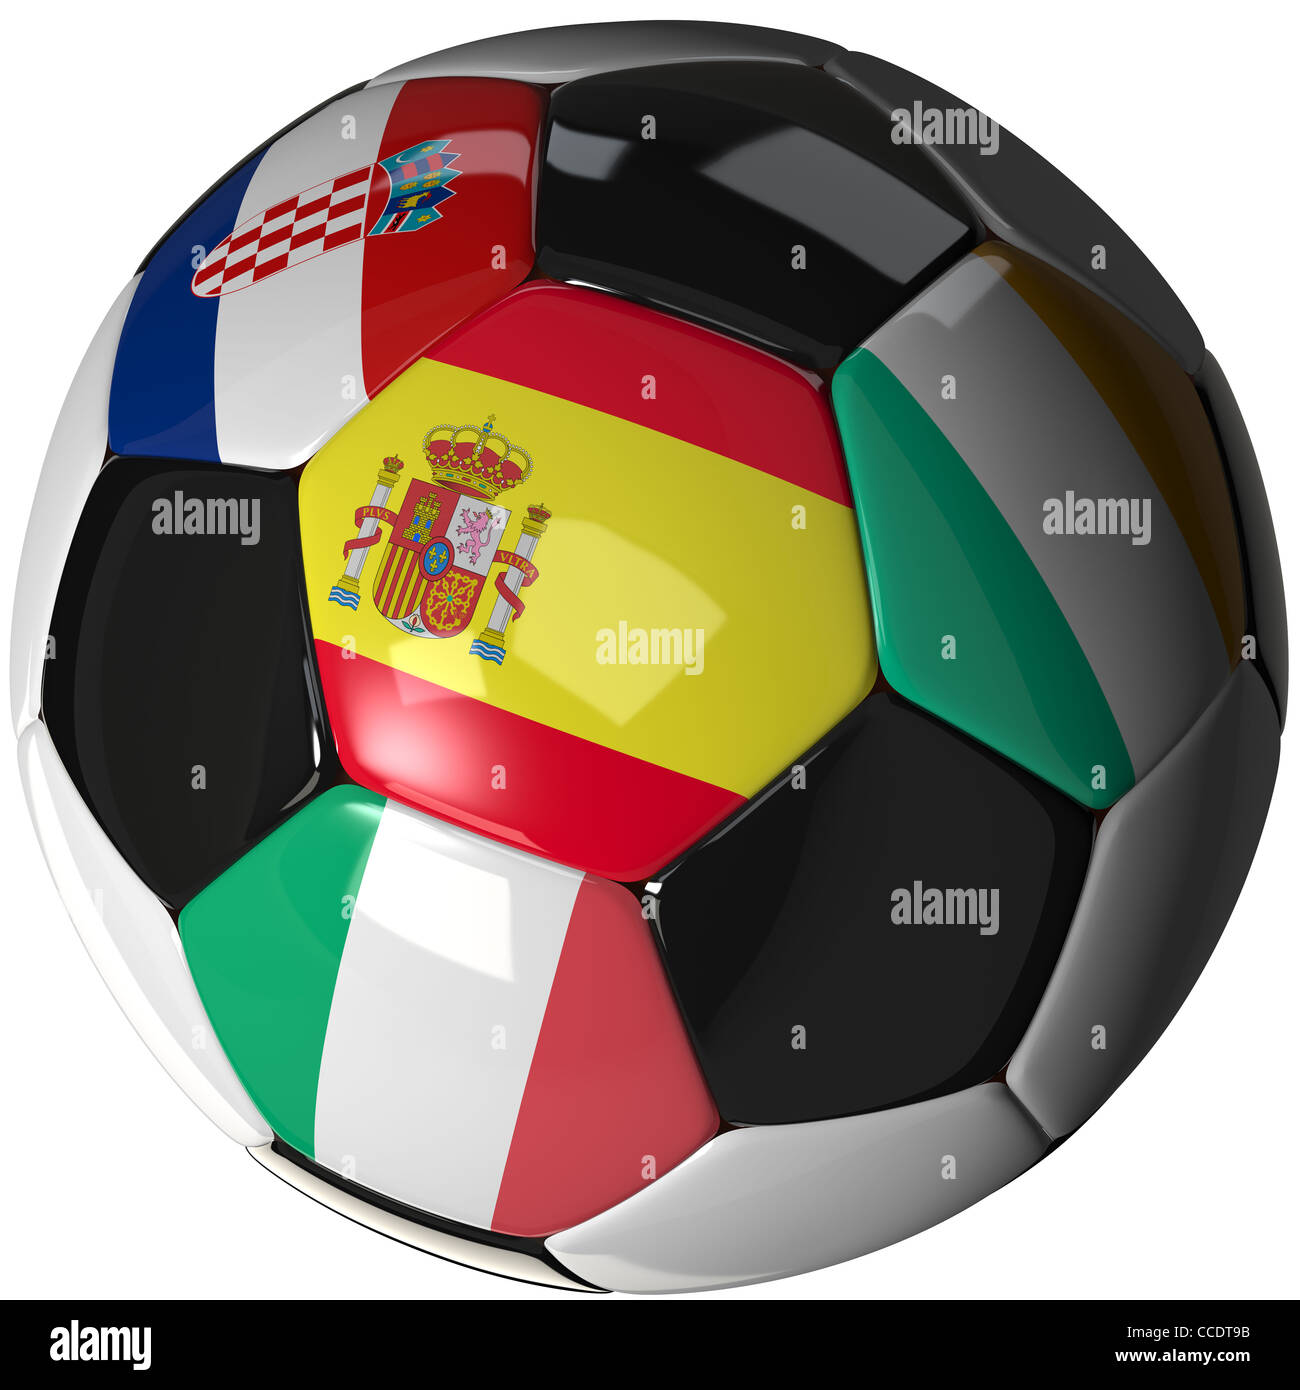 Soccer ball with the four flags of the competing teams in group C of the 2012 European Soccer Championship. Stock Photo